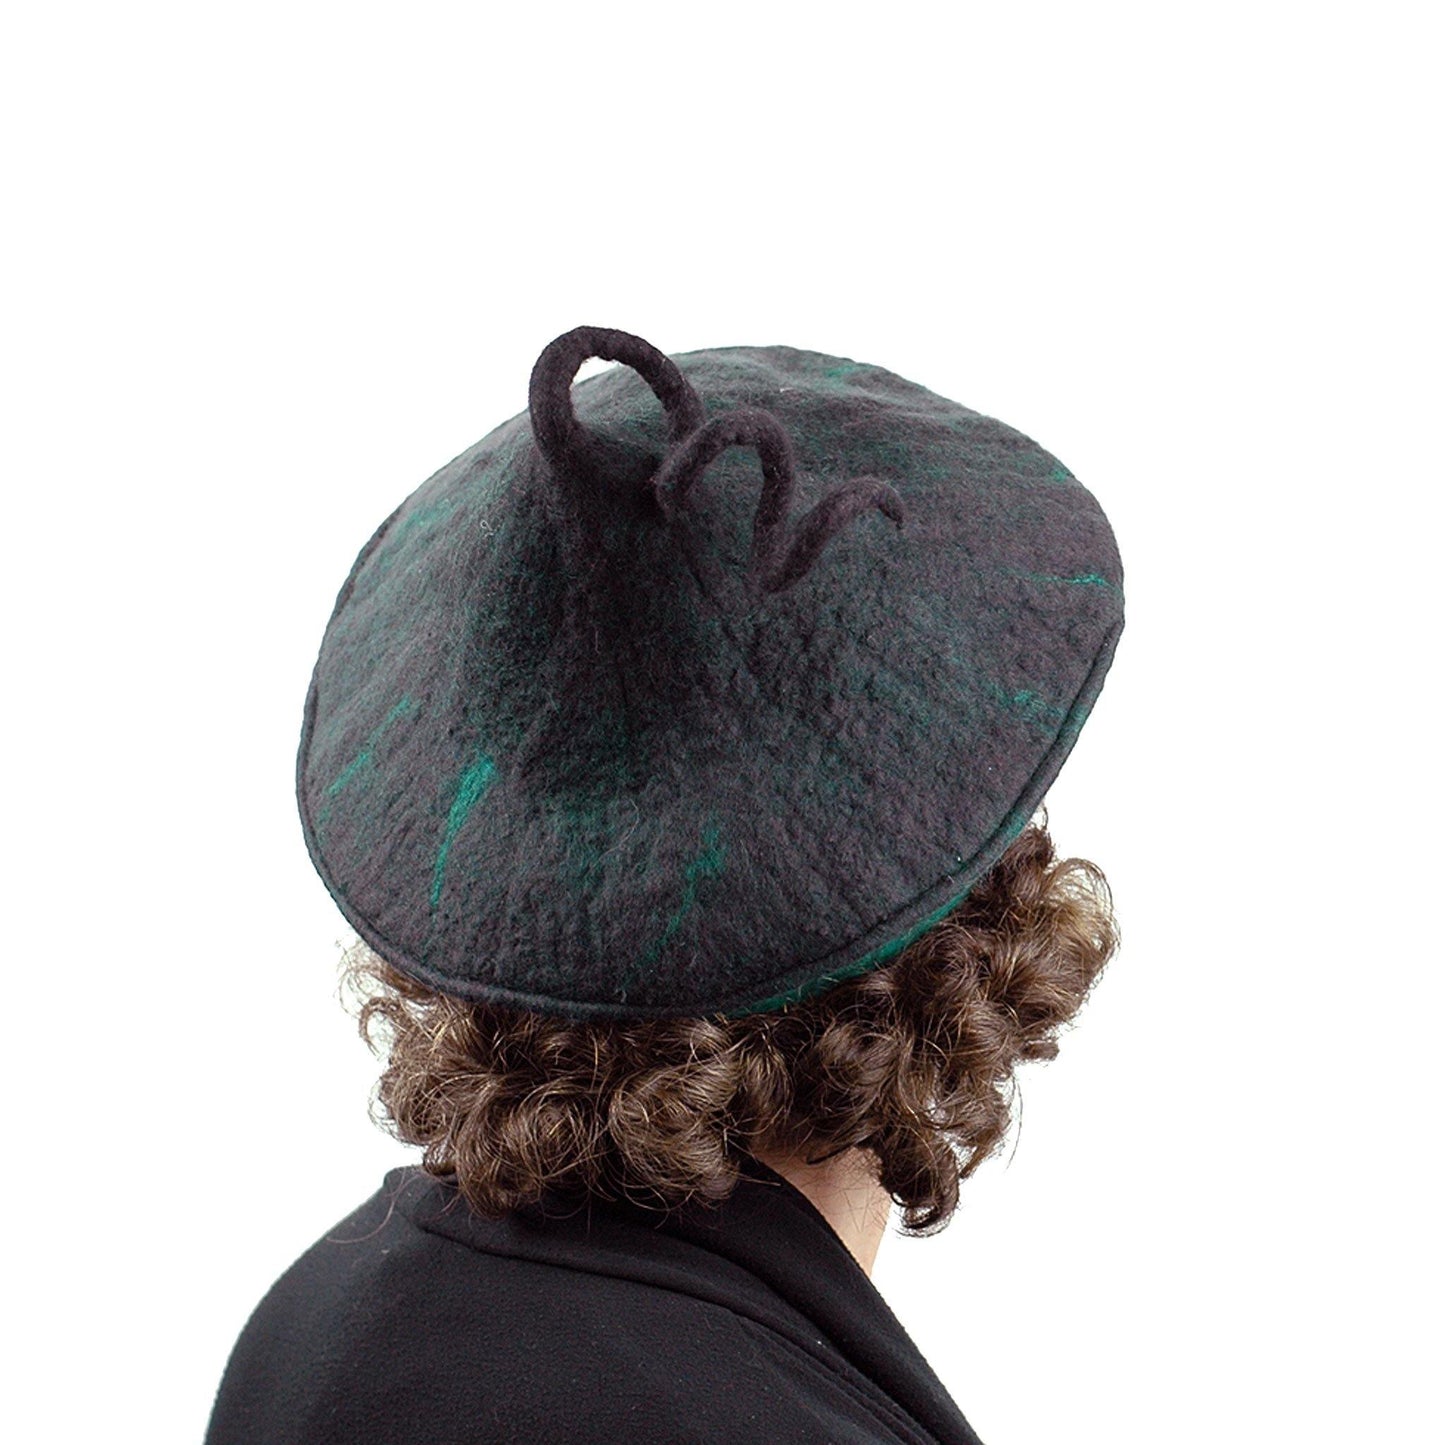 Black and Green Felted Beret with Curlicue on Top - back view